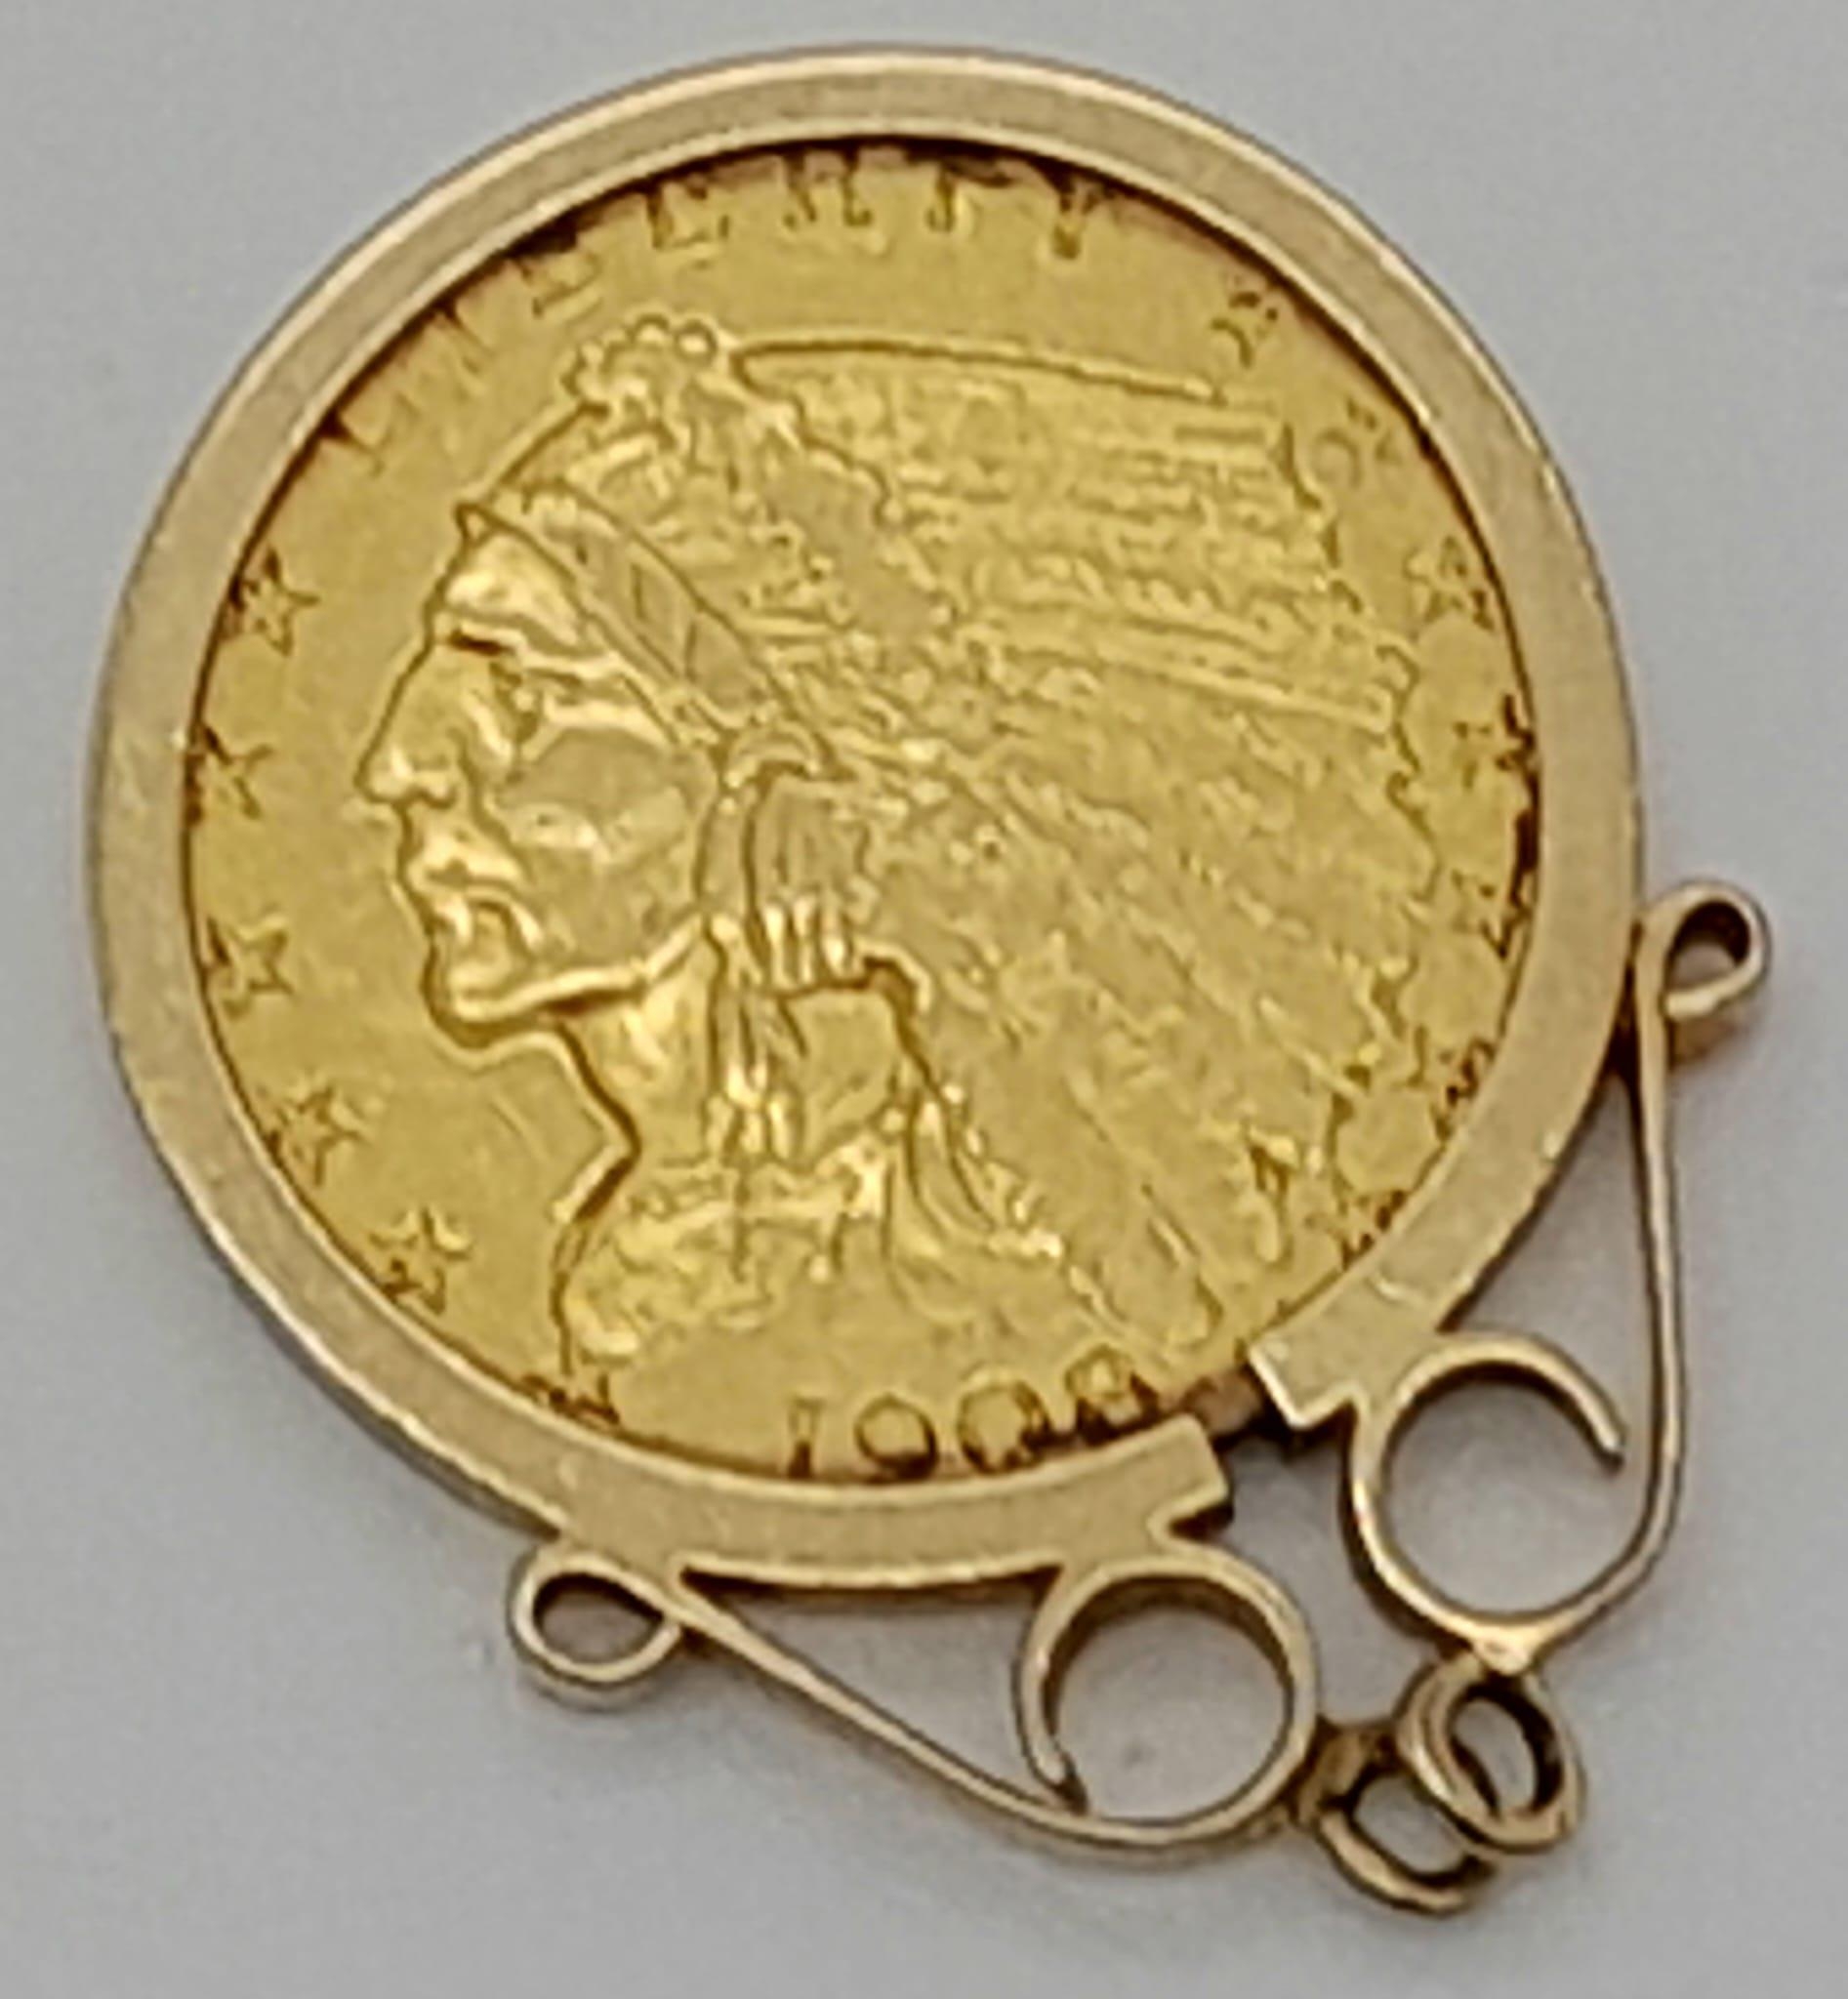 A 22k (900) Gold 1908 USA Two and a Half Dollar Coin in a 9K Gold Setting. 5.13g total weight. - Image 2 of 3